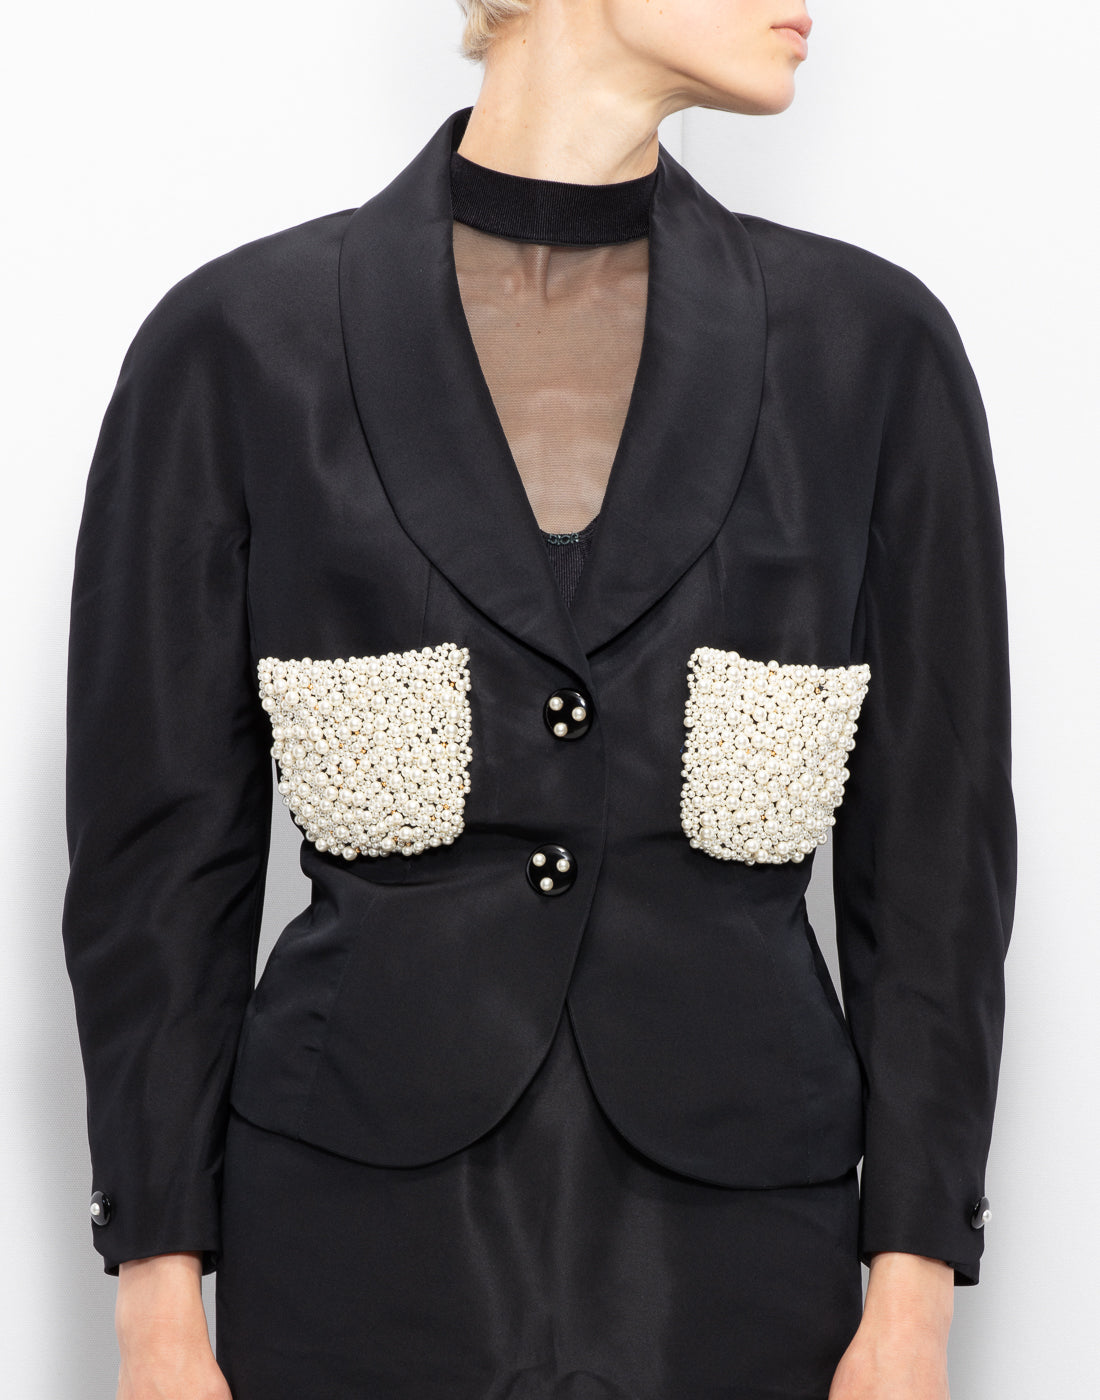 Chanel 80's Jacket Suit With Pearl Pockets